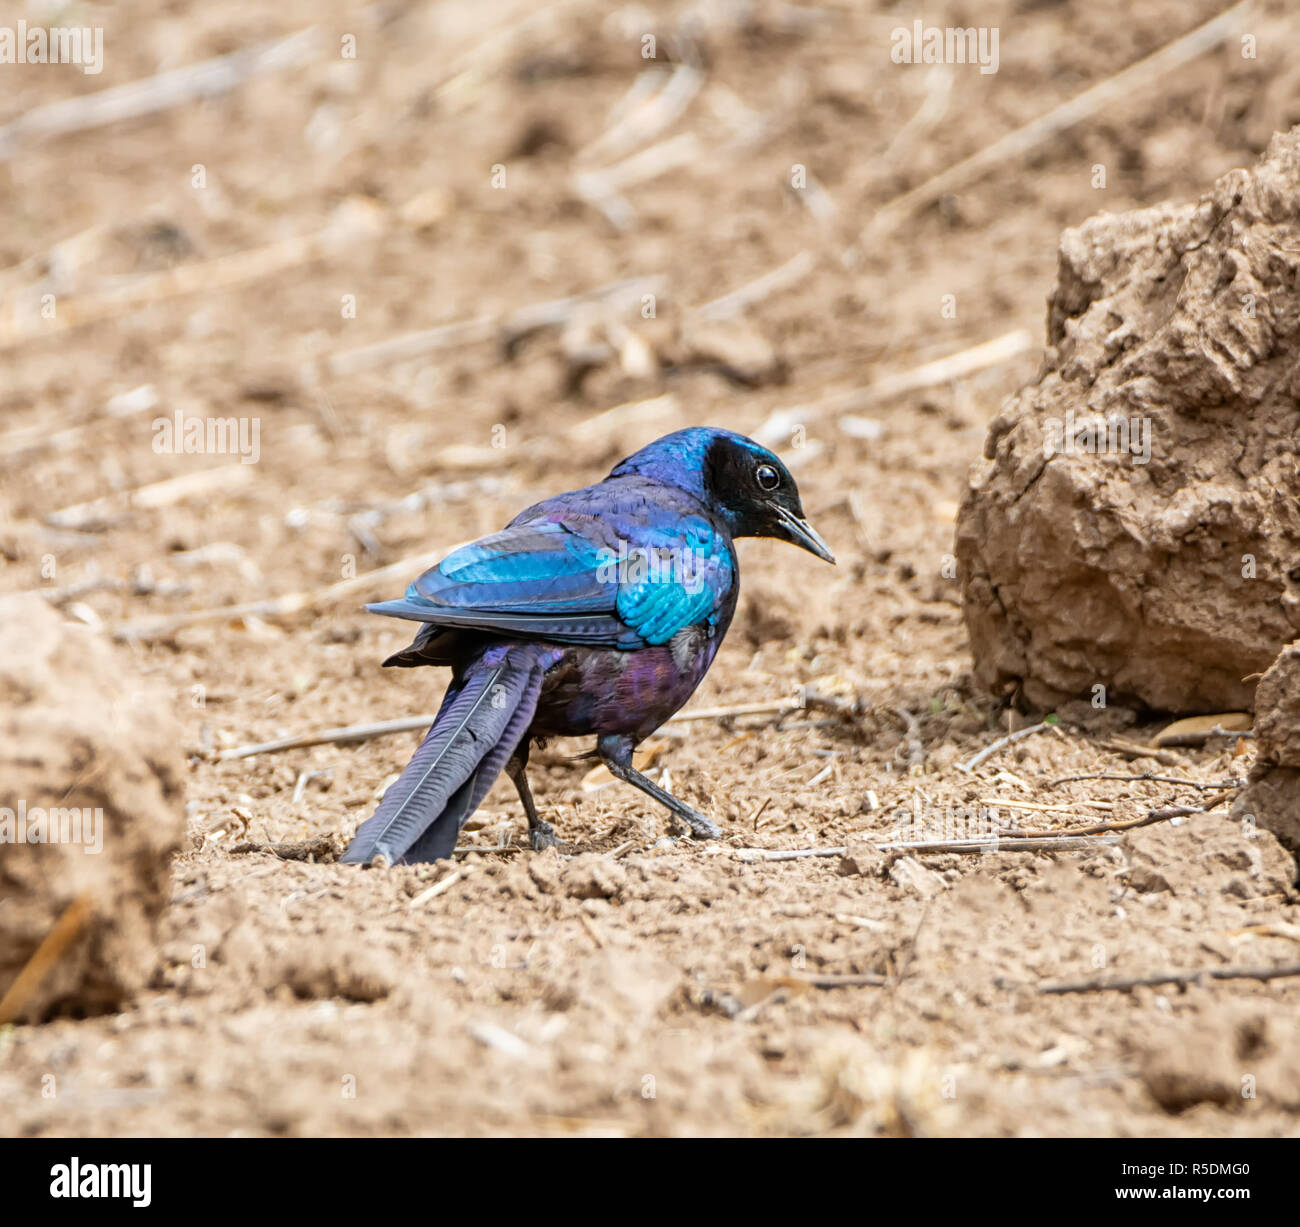 A Burchell's Starling on the ground in Southern Africa Stock Photo